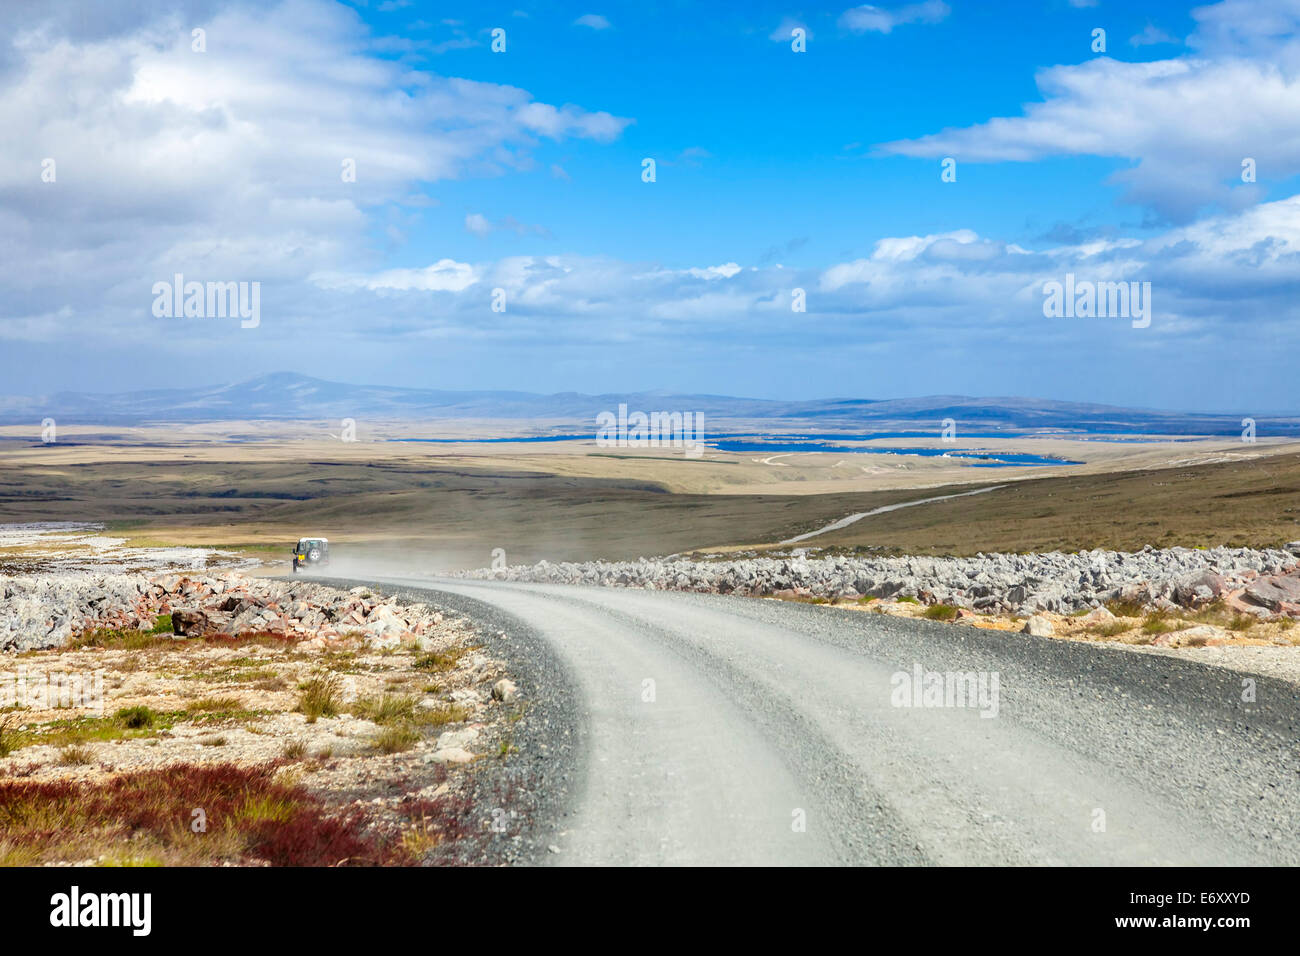 4X4 Safari in the Falkland Islands. From Port Stanley to North Pond on East Falkland. Stock Photo